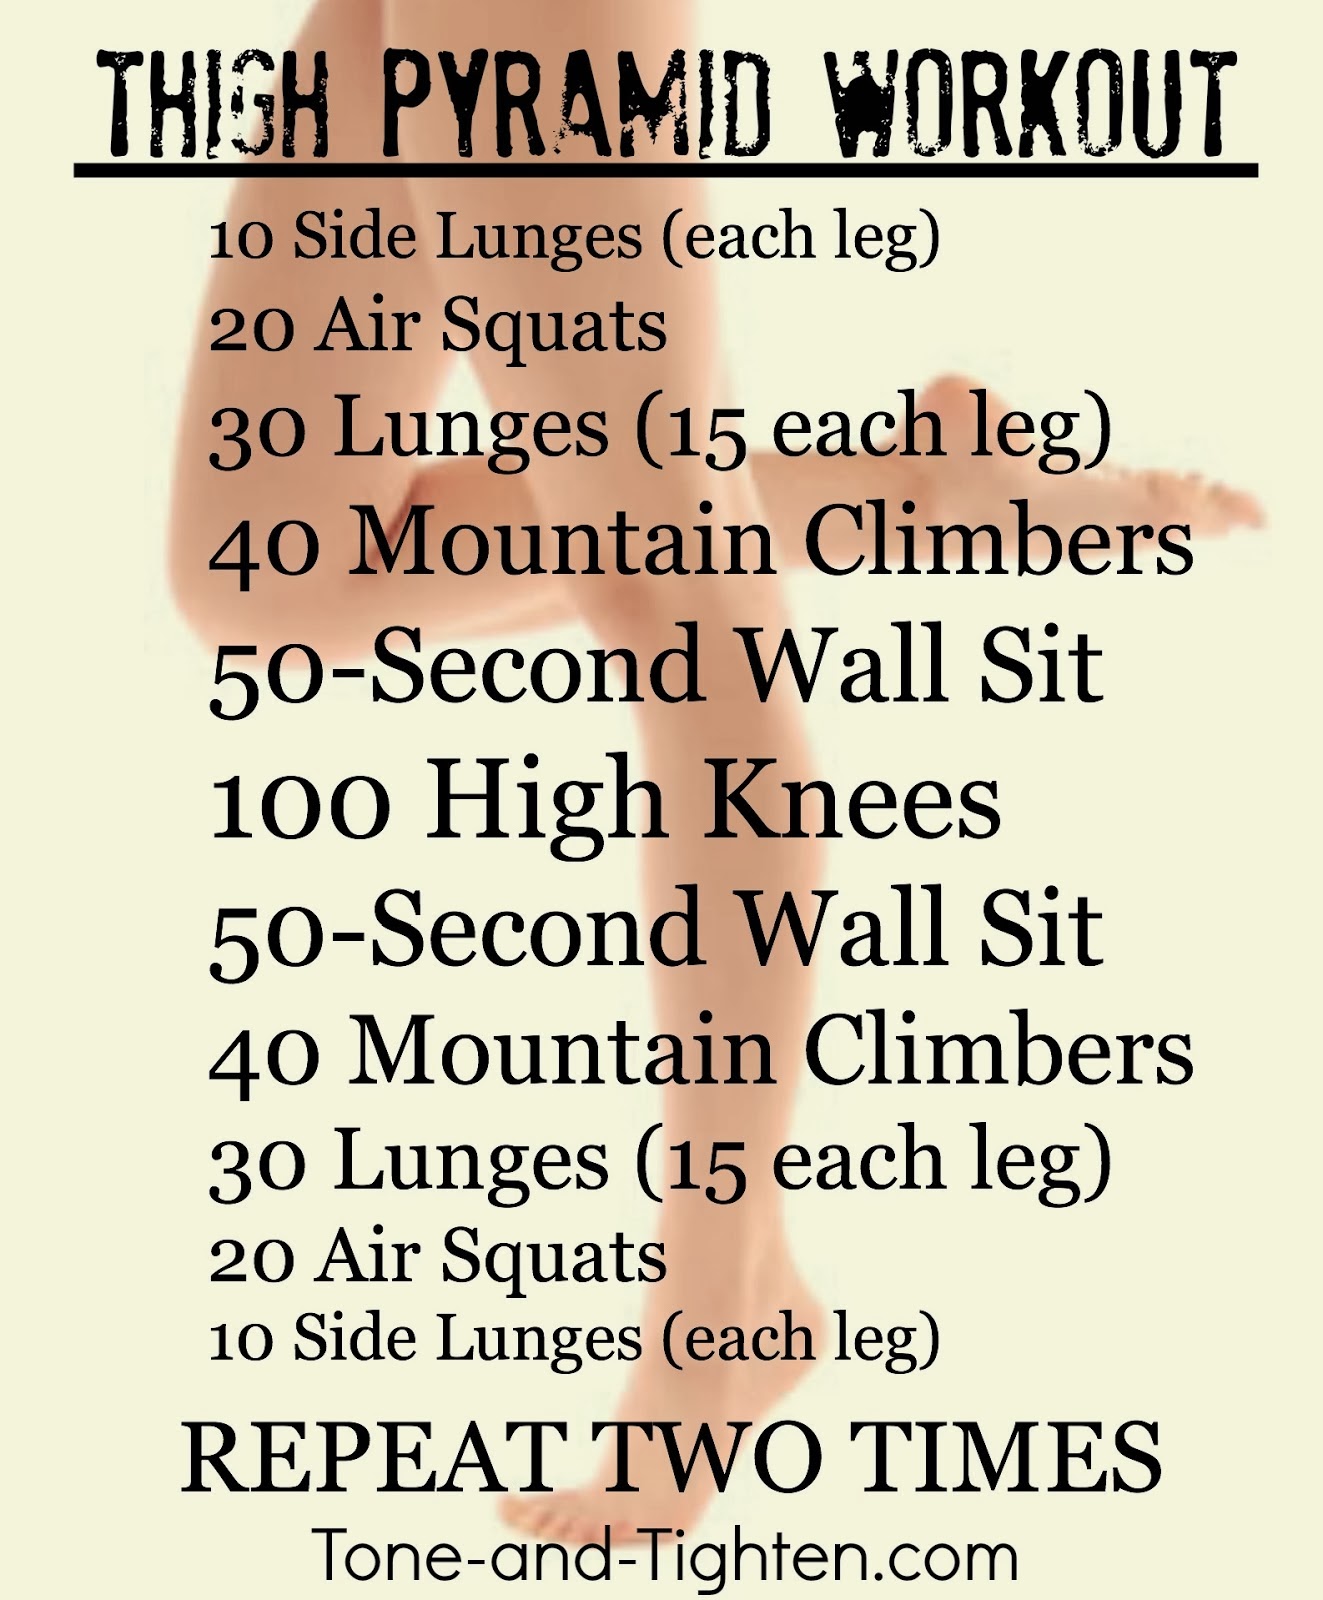 Weekly Workout Plan – Body Shred From Toe To Head!